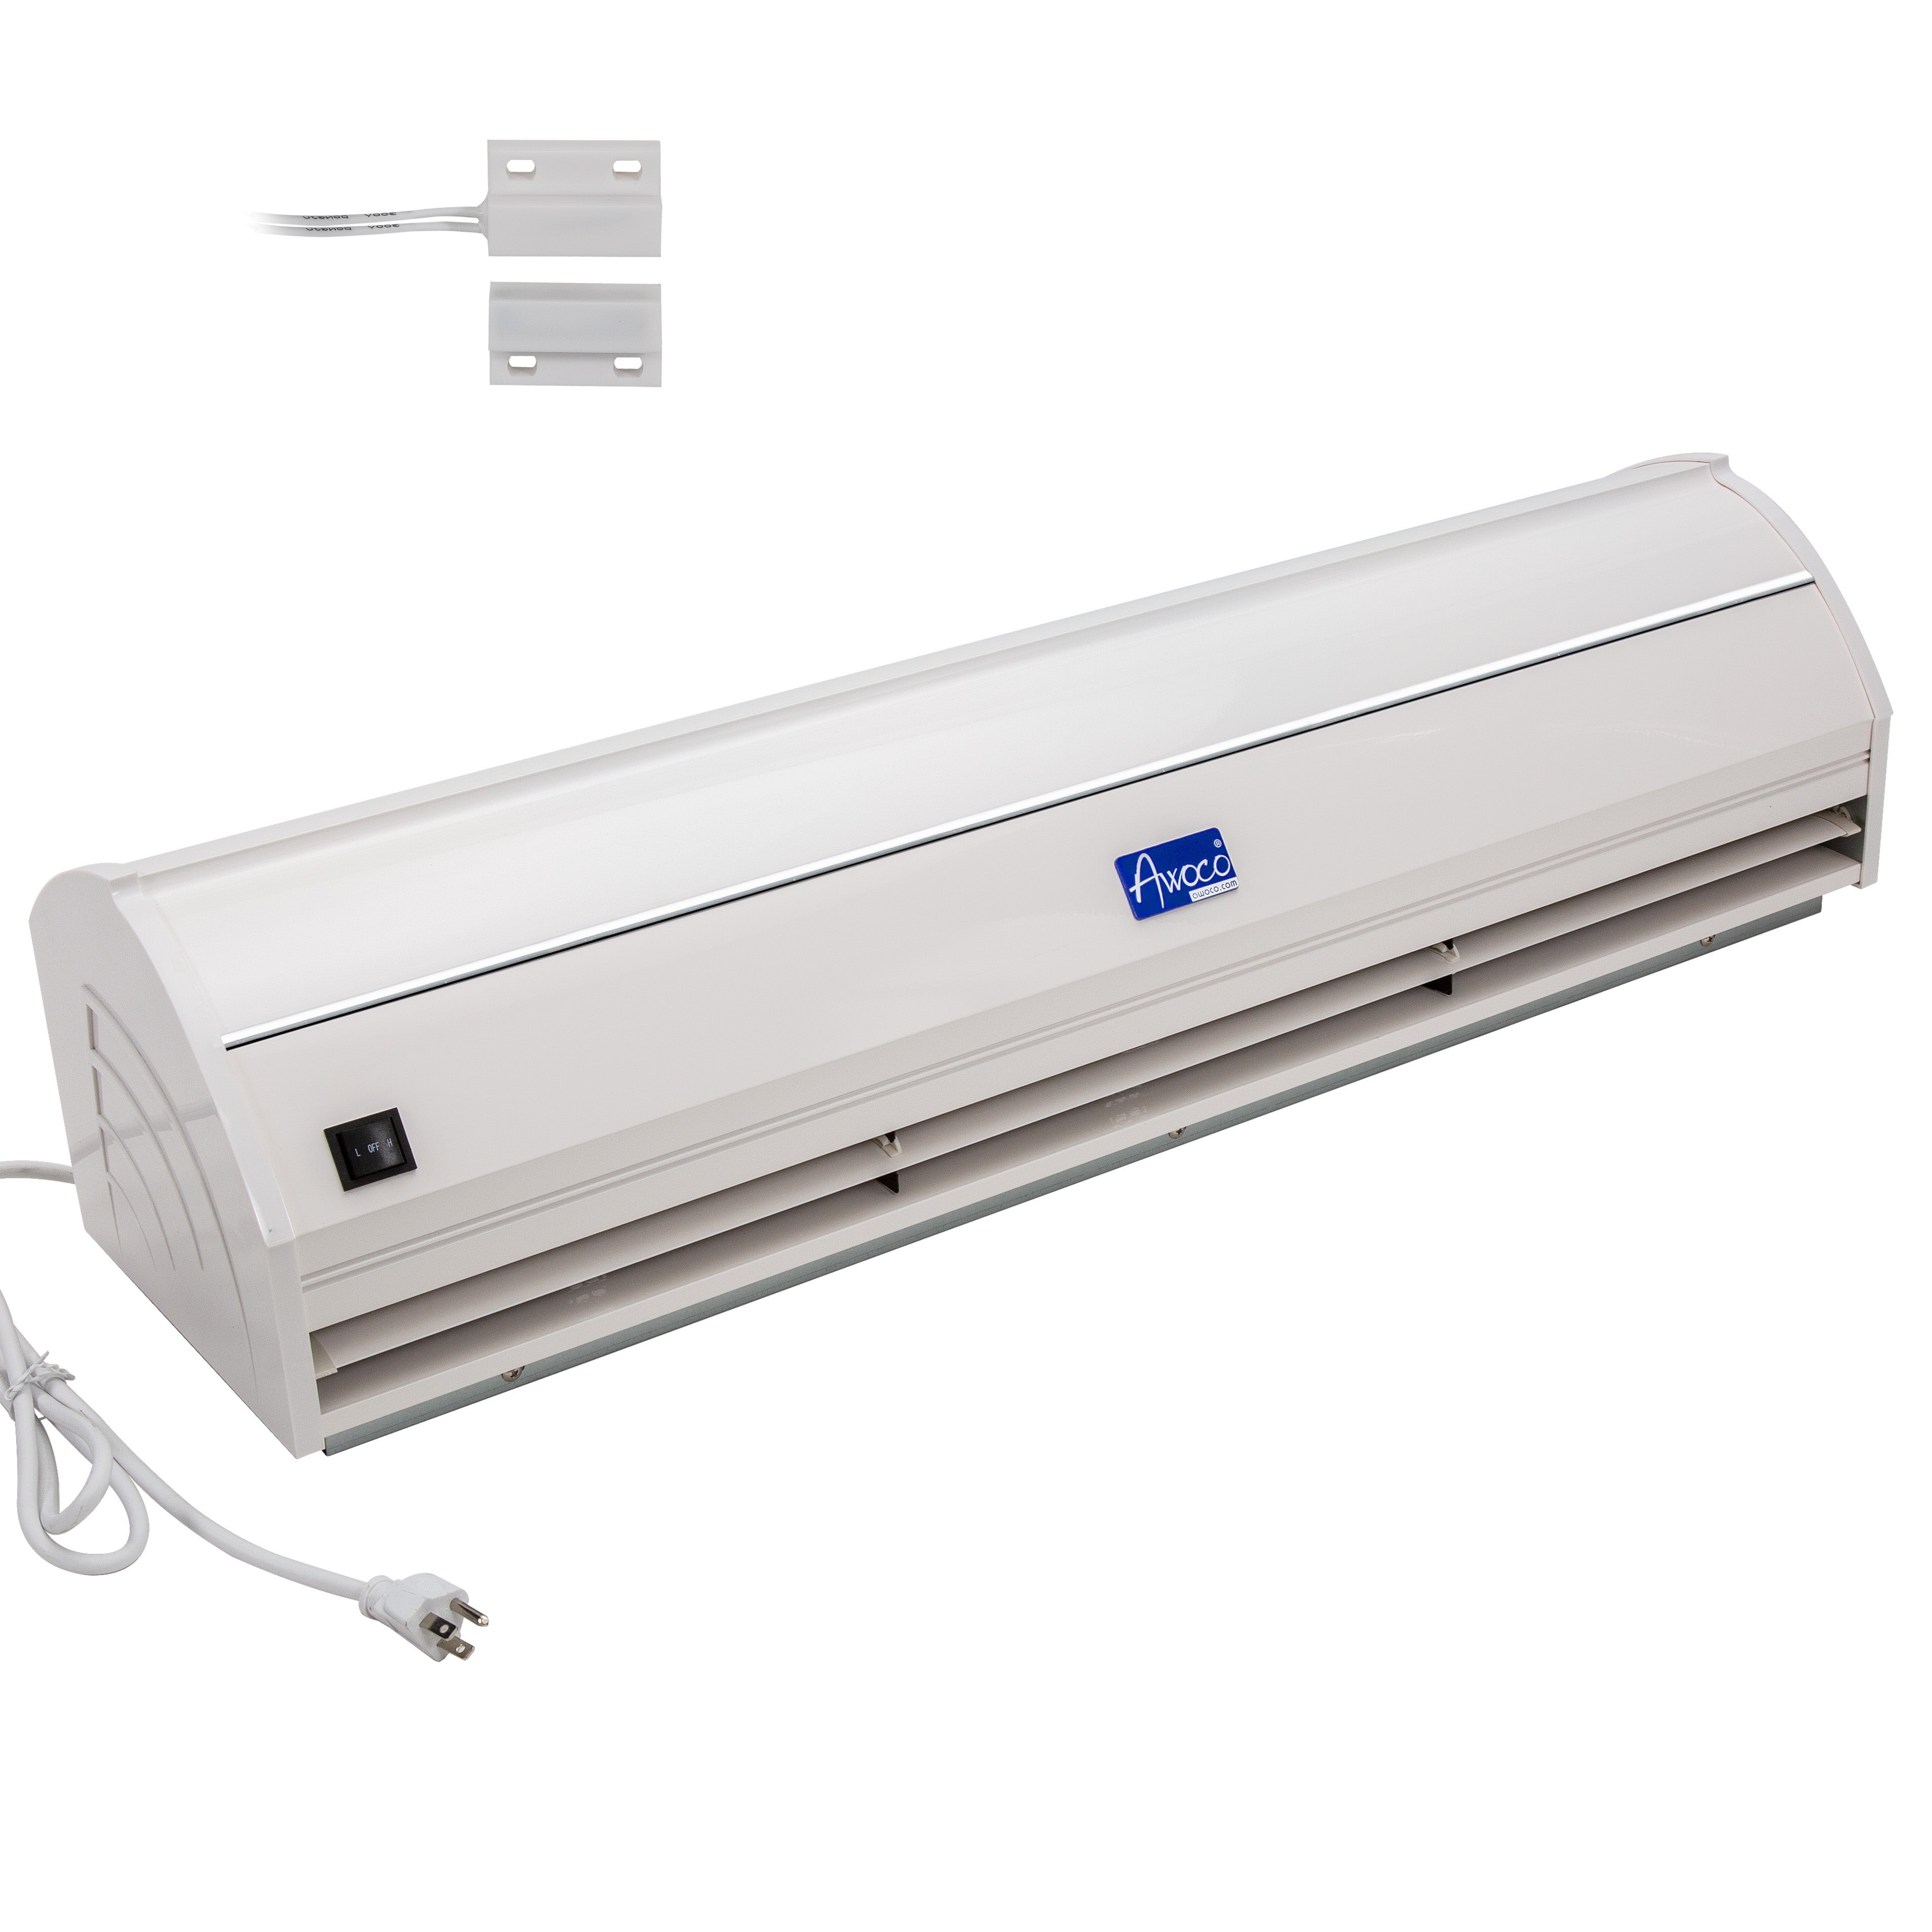 [Refurbished] Awoco AC24-B21 72" Elegant 2 Speeds 1800 CFM Indoor Air Curtain, CE Certified, 120V Unheated with an Easy-Install Magnetic Door Switch